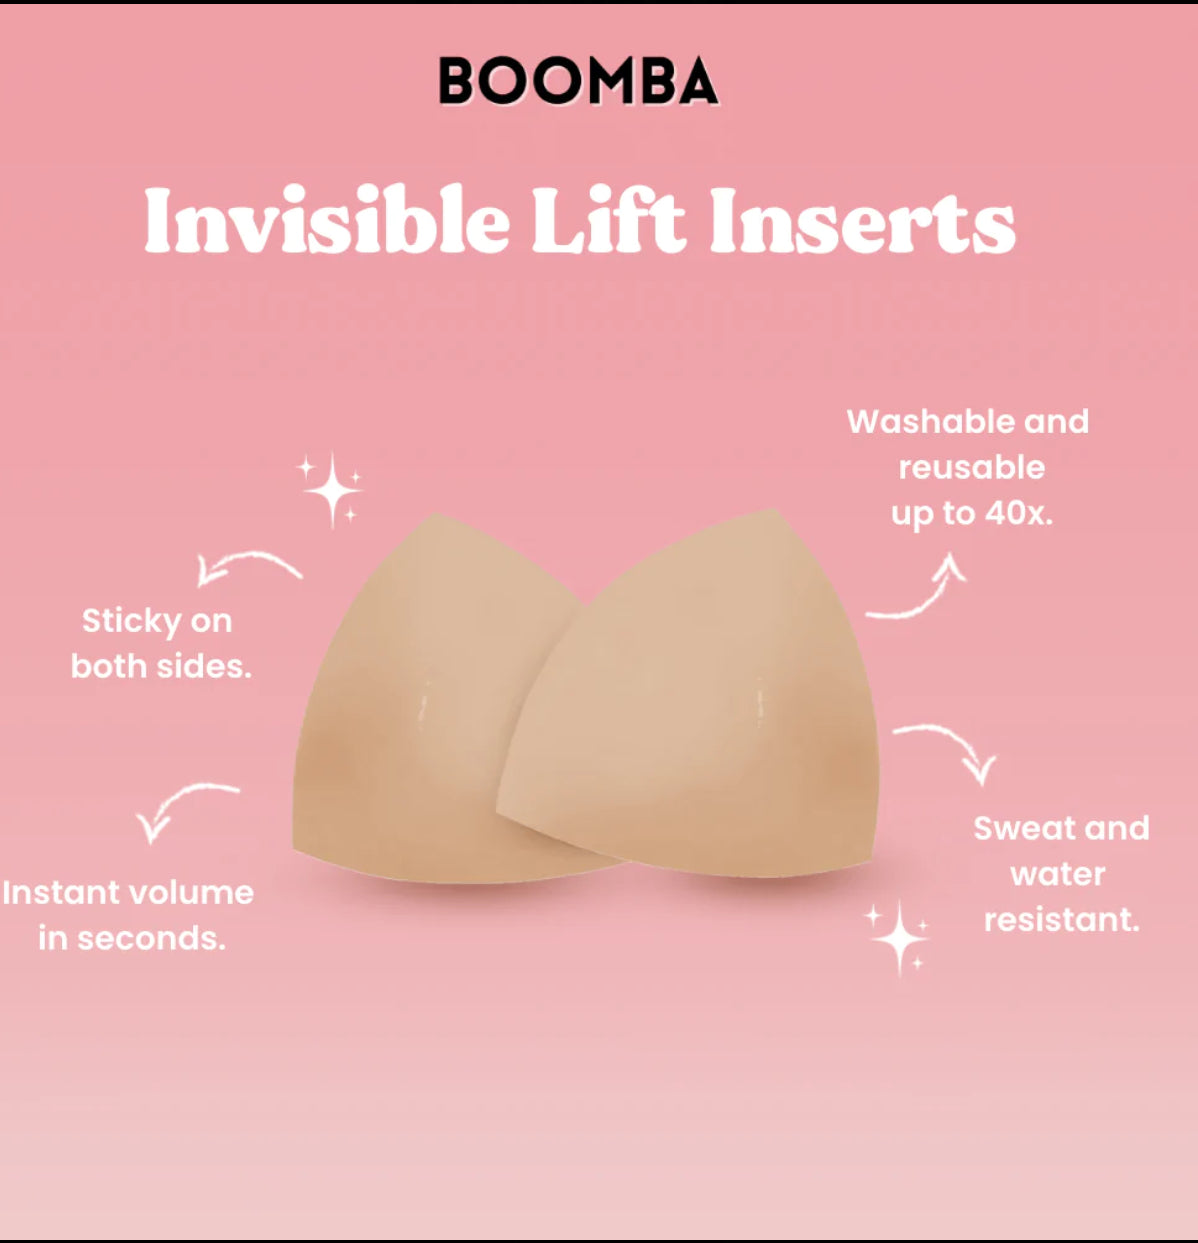 Boomba Bra INVISIBLE LIFT Inserts (PATENTED Double-Sided Adhesive Inserts  from USA)